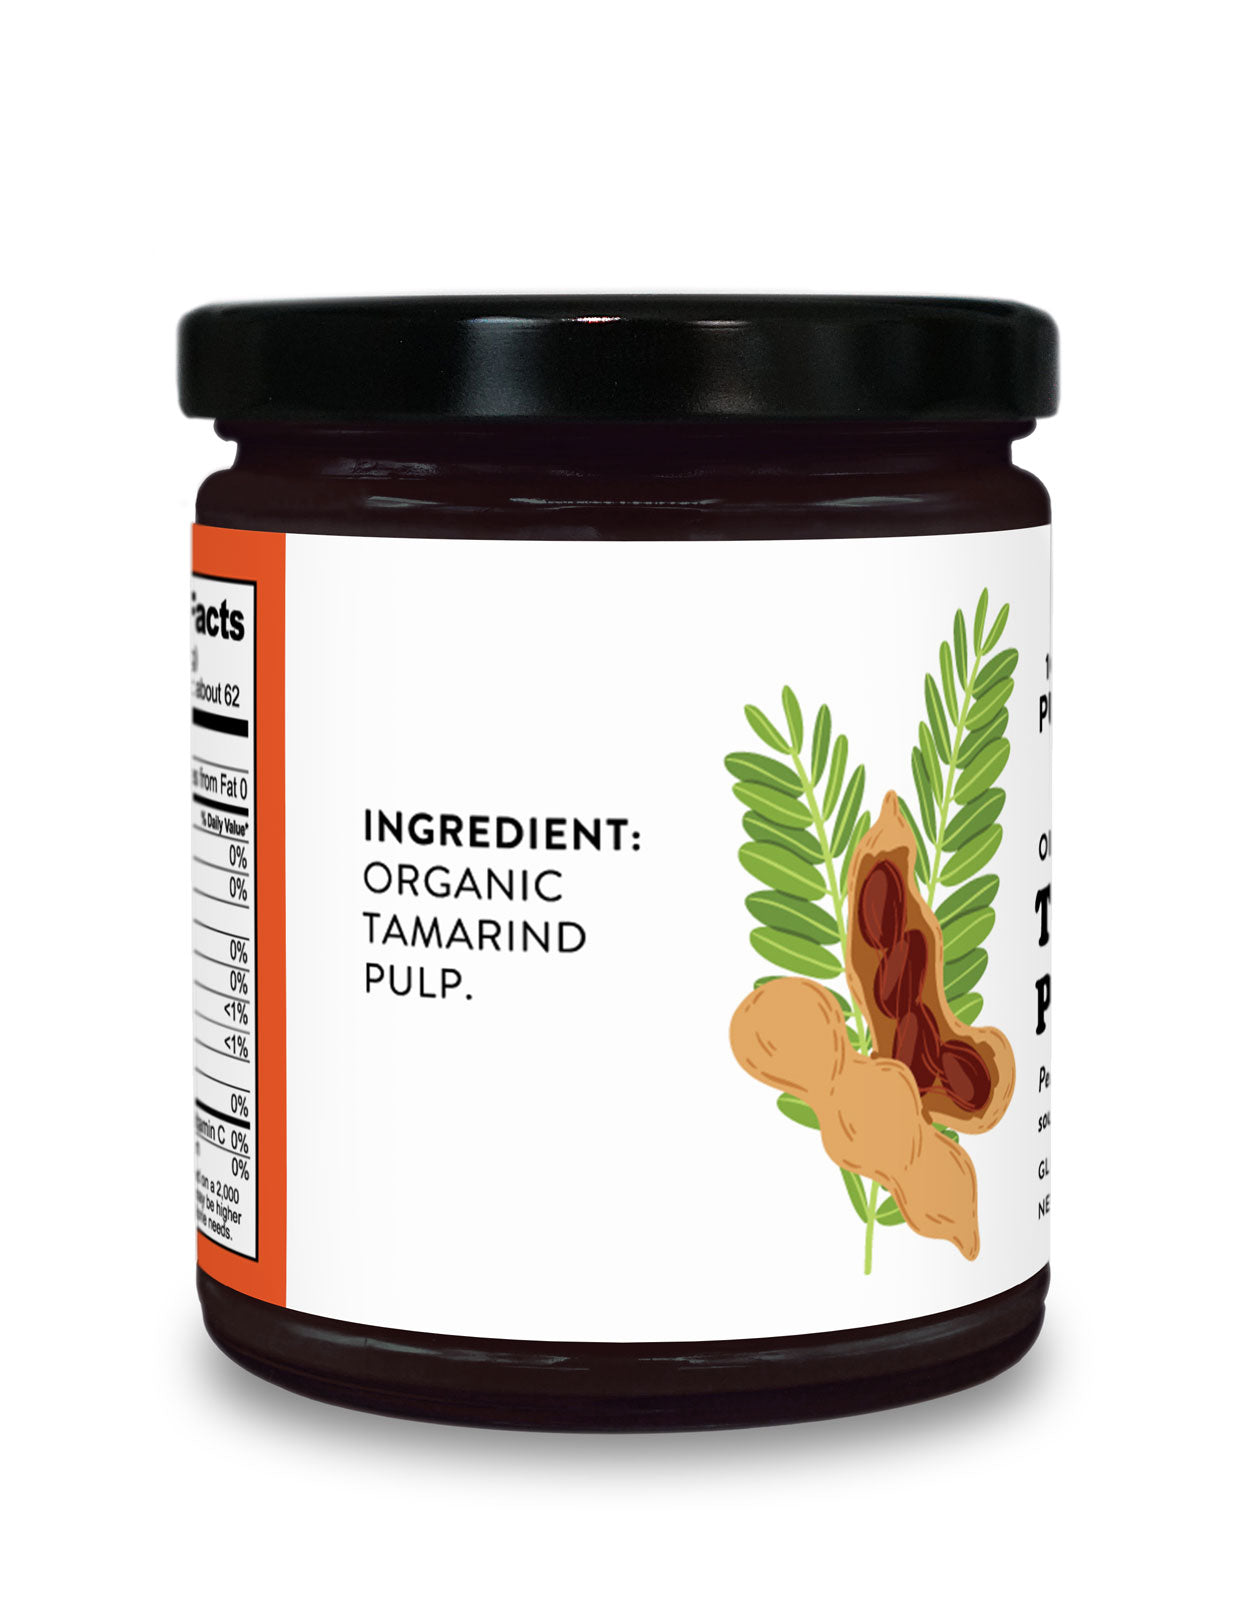 Ingredients label on a jar of Organic Tamarind Concentrate from Pure Indian Foods showing the only ingredient is organic tamarind pulp